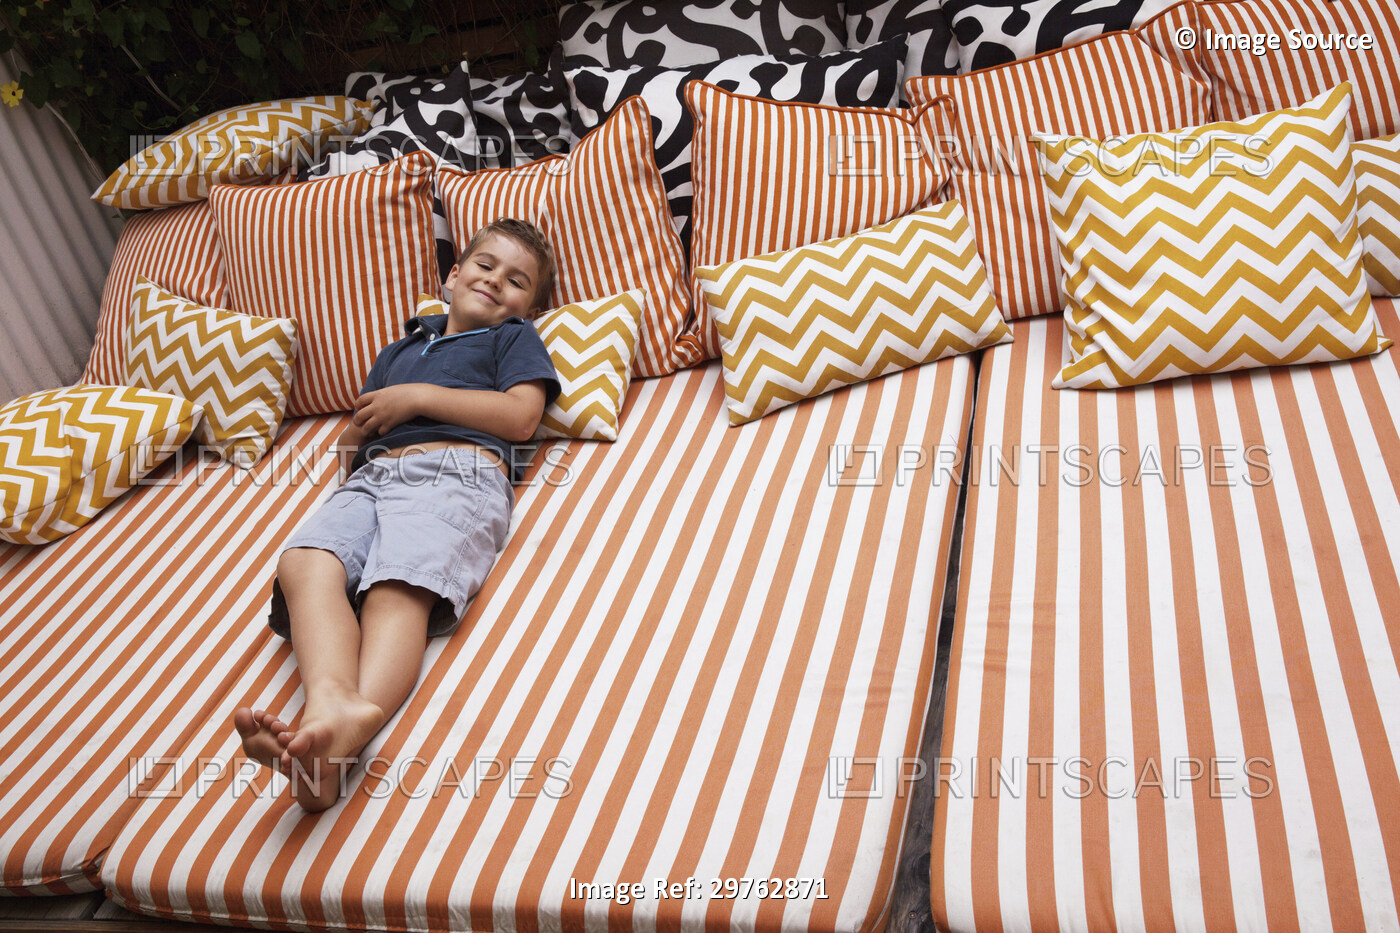 Boy relaxing on striped outdoor  furniture with cushions